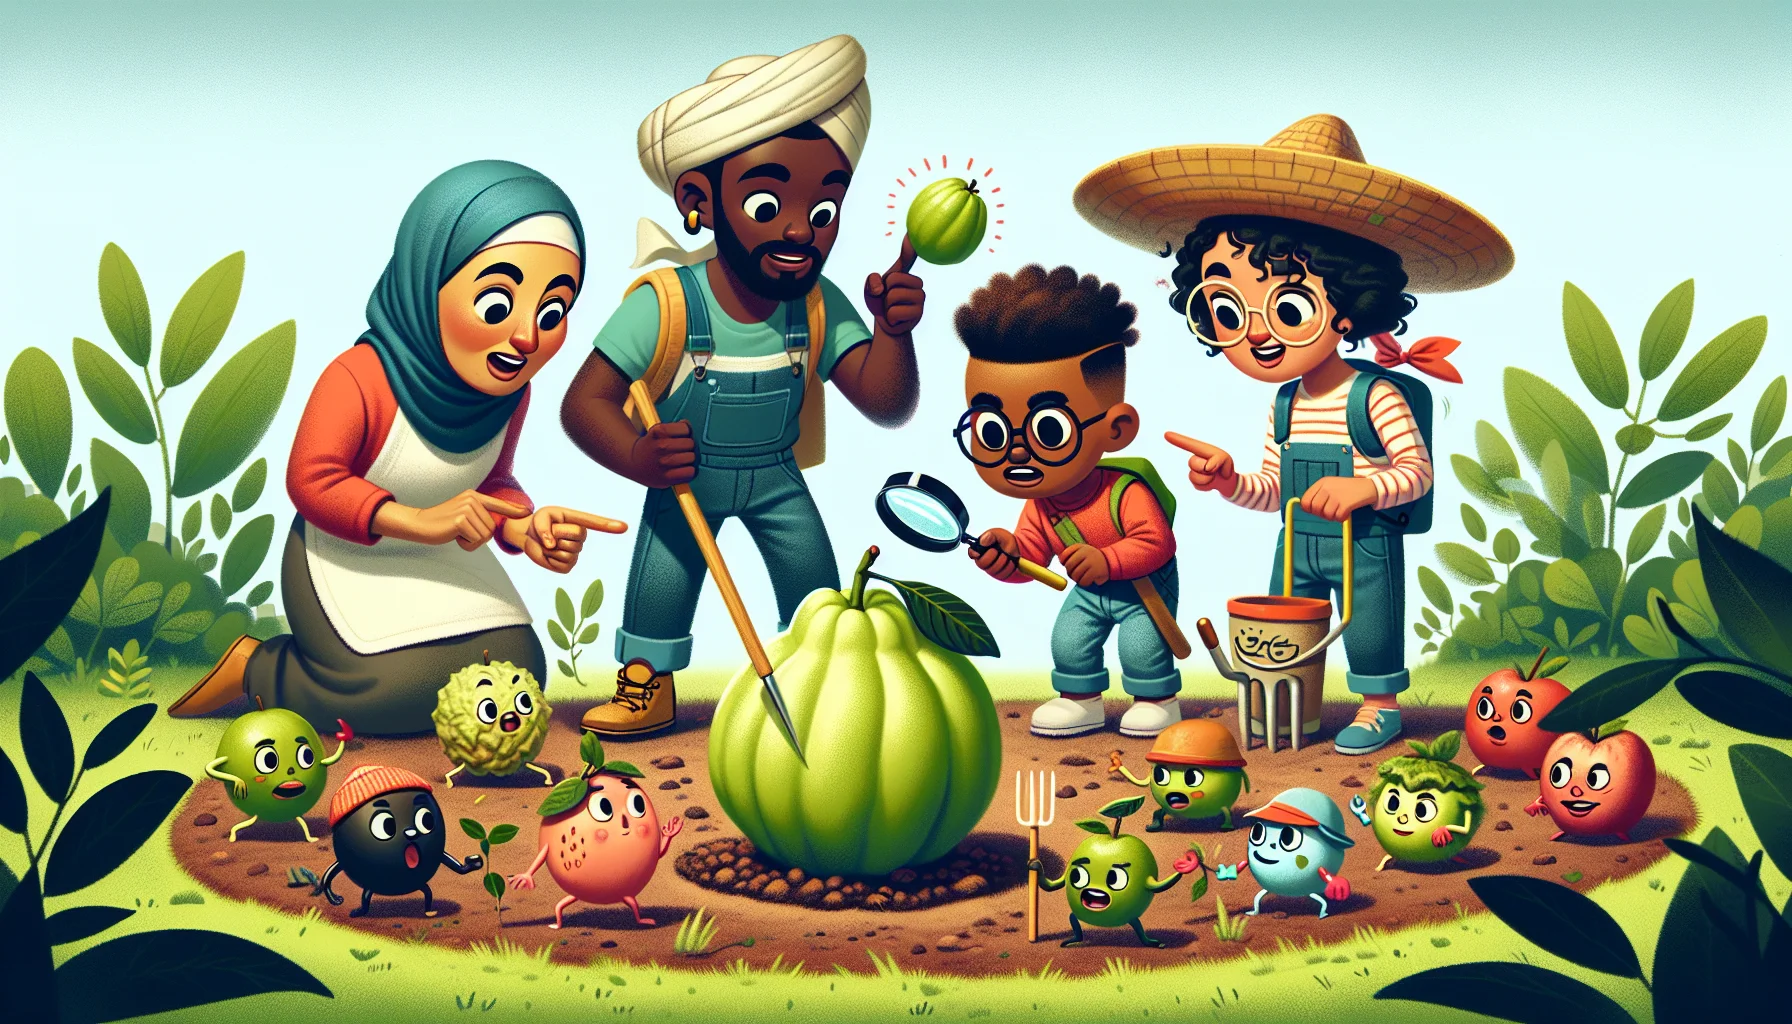 Generate a playful, realistic illustration representing the process of figuring out if a guava is ripe. Show a garden setting with a diverse group of three individuals engaged in the activity. A Middle-Eastern female gardener pointing out each step with a teaching stick, a Black male with a magnifying glass examining the guava, and an interested young Hispanic child observing keenly. Quirky little garden tools with faces on them appear to be participating as well and typing their own reactions to the scene, adding to the humor. This humorous scenario is meant to inspire people to try gardening.